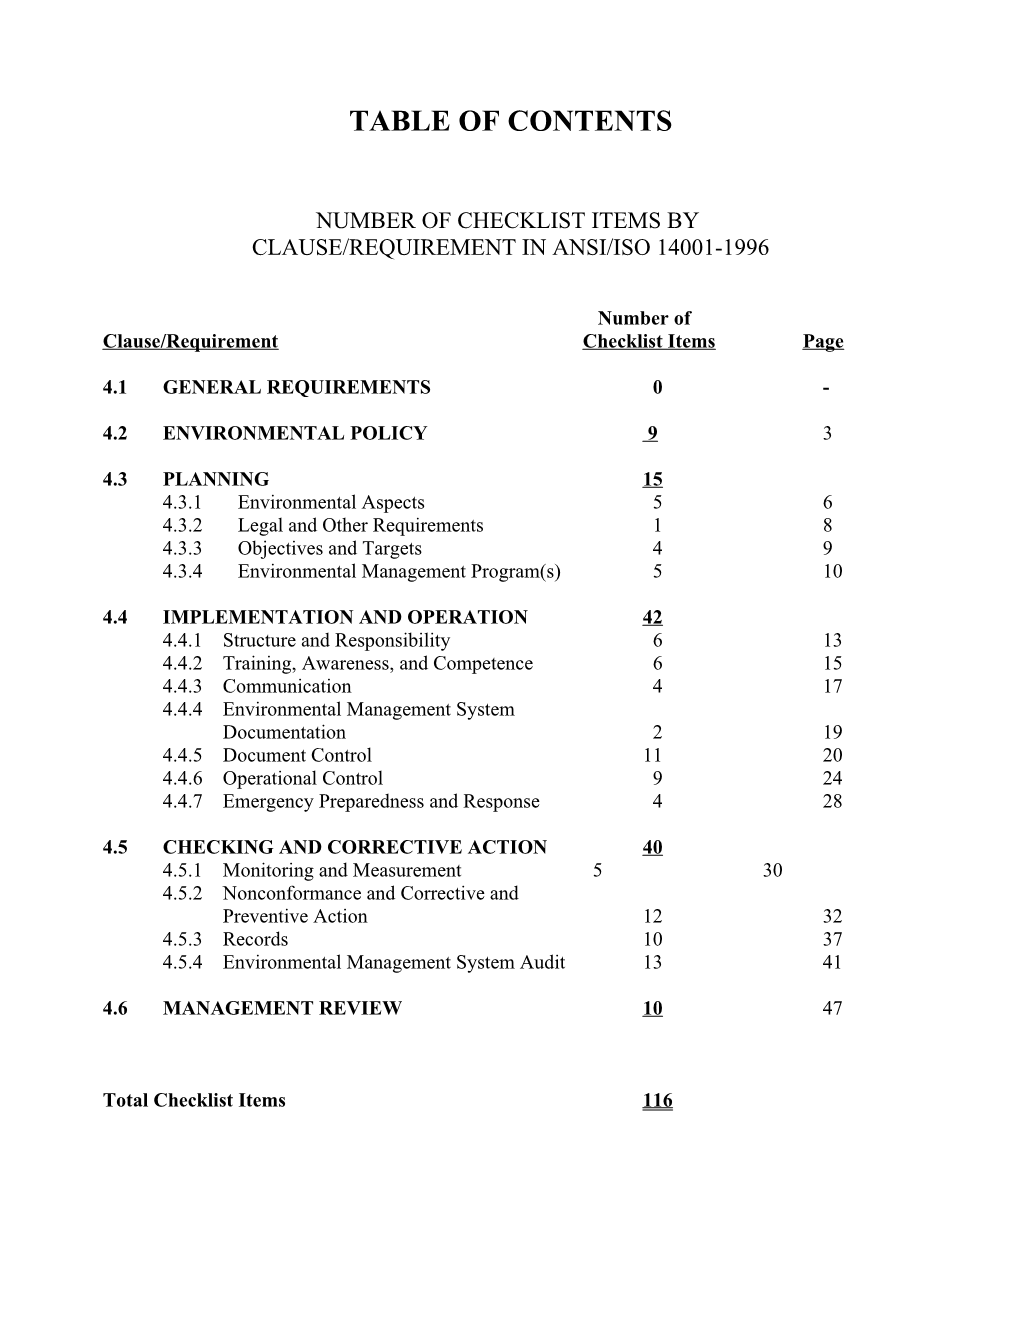 Table of Contents s167